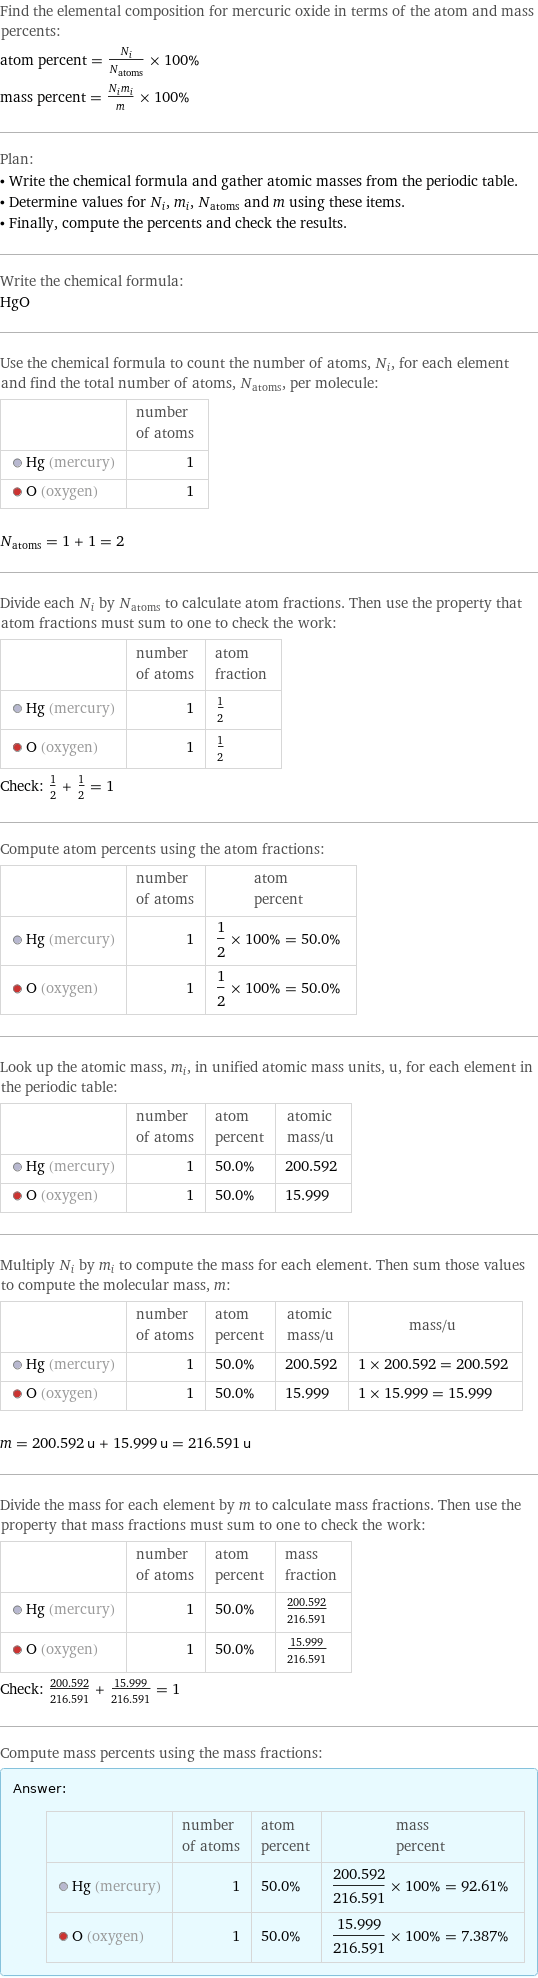 Find the elemental composition for mercuric oxide in terms of the atom and mass percents: atom percent = N_i/N_atoms × 100% mass percent = (N_im_i)/m × 100% Plan: • Write the chemical formula and gather atomic masses from the periodic table. • Determine values for N_i, m_i, N_atoms and m using these items. • Finally, compute the percents and check the results. Write the chemical formula: HgO Use the chemical formula to count the number of atoms, N_i, for each element and find the total number of atoms, N_atoms, per molecule:  | number of atoms  Hg (mercury) | 1  O (oxygen) | 1  N_atoms = 1 + 1 = 2 Divide each N_i by N_atoms to calculate atom fractions. Then use the property that atom fractions must sum to one to check the work:  | number of atoms | atom fraction  Hg (mercury) | 1 | 1/2  O (oxygen) | 1 | 1/2 Check: 1/2 + 1/2 = 1 Compute atom percents using the atom fractions:  | number of atoms | atom percent  Hg (mercury) | 1 | 1/2 × 100% = 50.0%  O (oxygen) | 1 | 1/2 × 100% = 50.0% Look up the atomic mass, m_i, in unified atomic mass units, u, for each element in the periodic table:  | number of atoms | atom percent | atomic mass/u  Hg (mercury) | 1 | 50.0% | 200.592  O (oxygen) | 1 | 50.0% | 15.999 Multiply N_i by m_i to compute the mass for each element. Then sum those values to compute the molecular mass, m:  | number of atoms | atom percent | atomic mass/u | mass/u  Hg (mercury) | 1 | 50.0% | 200.592 | 1 × 200.592 = 200.592  O (oxygen) | 1 | 50.0% | 15.999 | 1 × 15.999 = 15.999  m = 200.592 u + 15.999 u = 216.591 u Divide the mass for each element by m to calculate mass fractions. Then use the property that mass fractions must sum to one to check the work:  | number of atoms | atom percent | mass fraction  Hg (mercury) | 1 | 50.0% | 200.592/216.591  O (oxygen) | 1 | 50.0% | 15.999/216.591 Check: 200.592/216.591 + 15.999/216.591 = 1 Compute mass percents using the mass fractions: Answer: |   | | number of atoms | atom percent | mass percent  Hg (mercury) | 1 | 50.0% | 200.592/216.591 × 100% = 92.61%  O (oxygen) | 1 | 50.0% | 15.999/216.591 × 100% = 7.387%